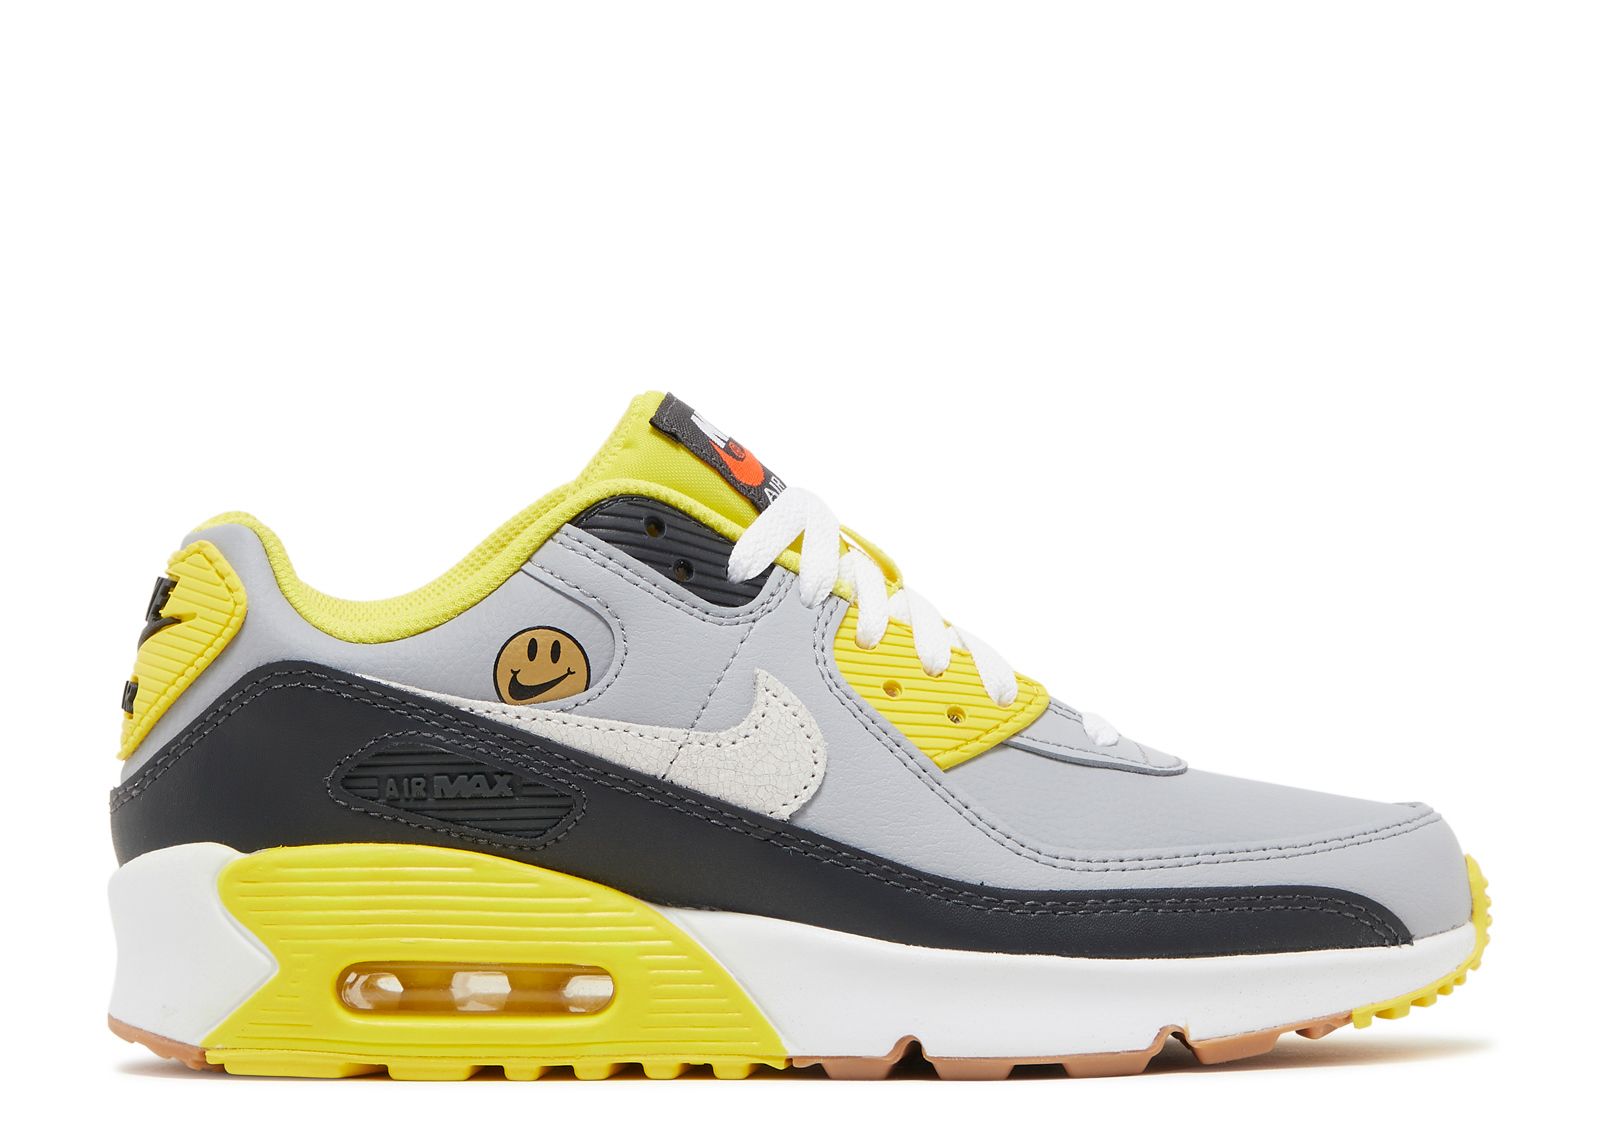 Кроссовки Nike Air Max 90 Leather Gs 'Go The Extra Smile', серый